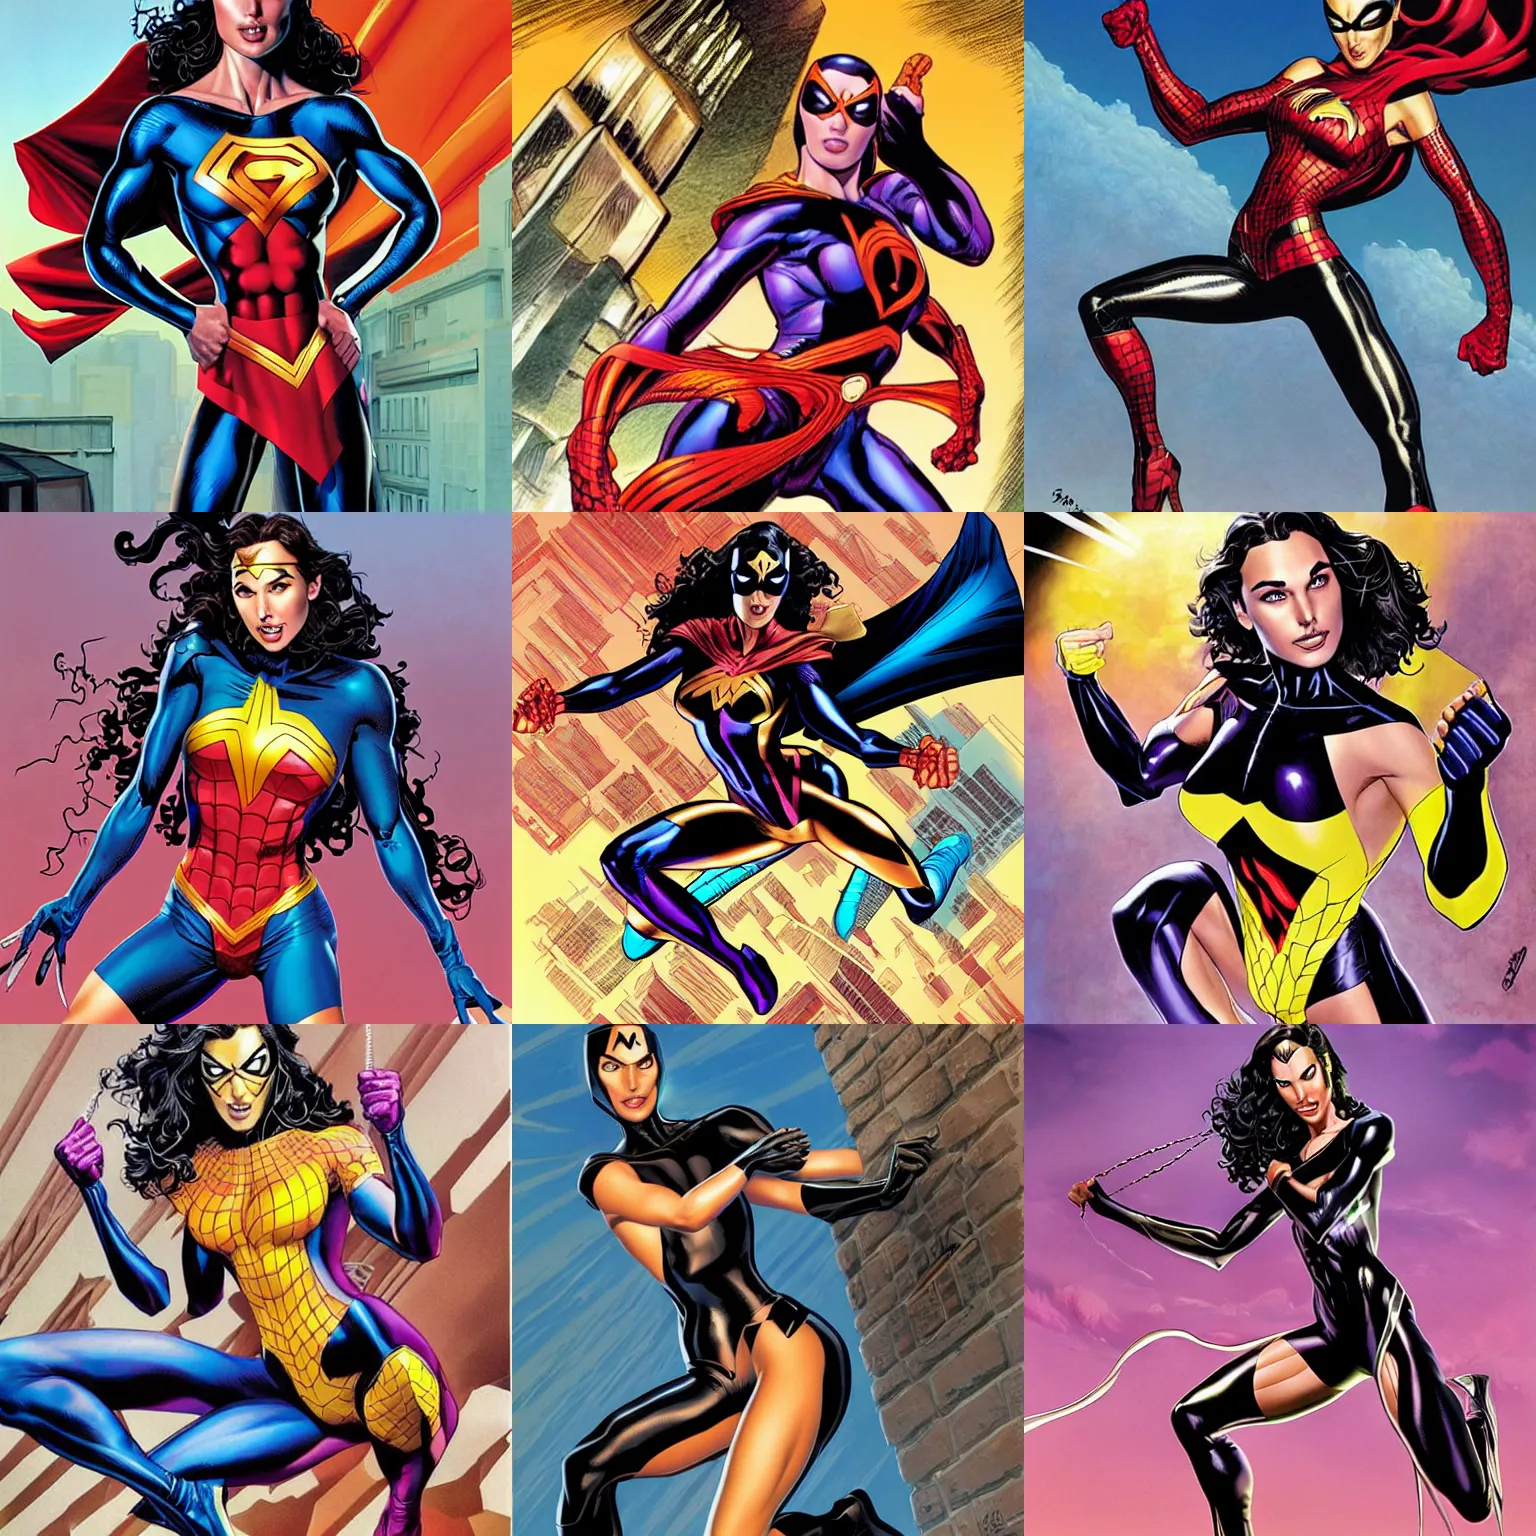 Prompt: model Gal Gadot as spidergirl in a strong pose by brian bolland by alex ross by Esad Ribic by Greg Land digital painting digital art